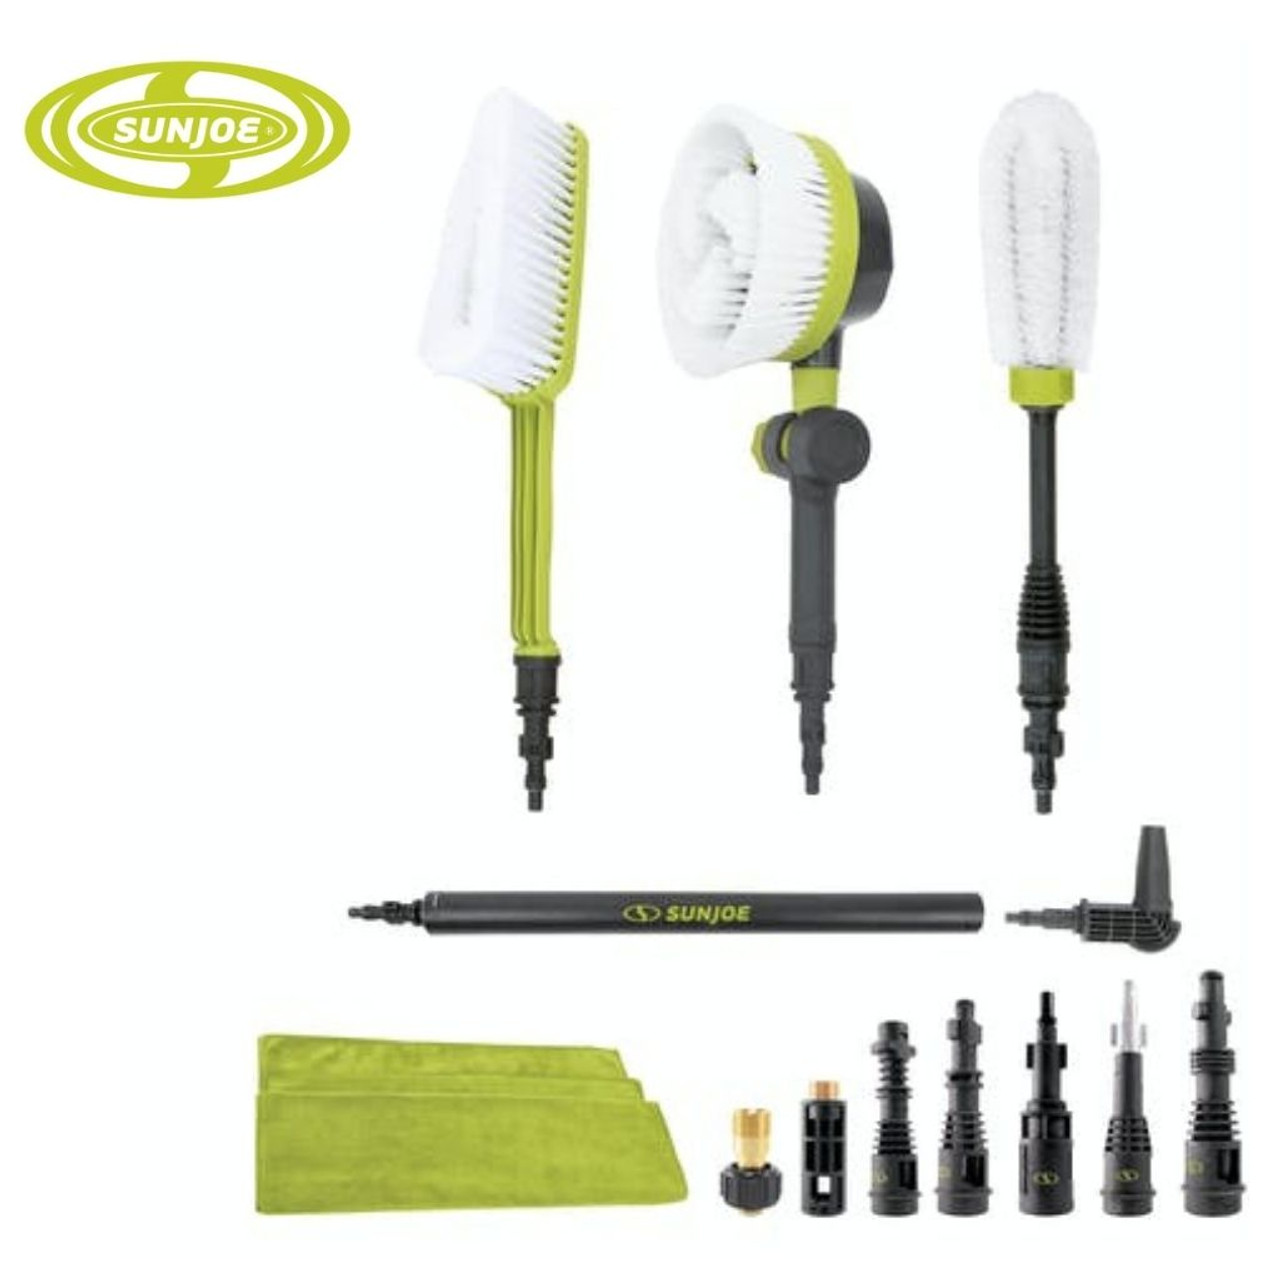 Sun Joe Auto Cleaning Brushes for Pressure Washers with Universal Adapters $54.99 (31% OFF)